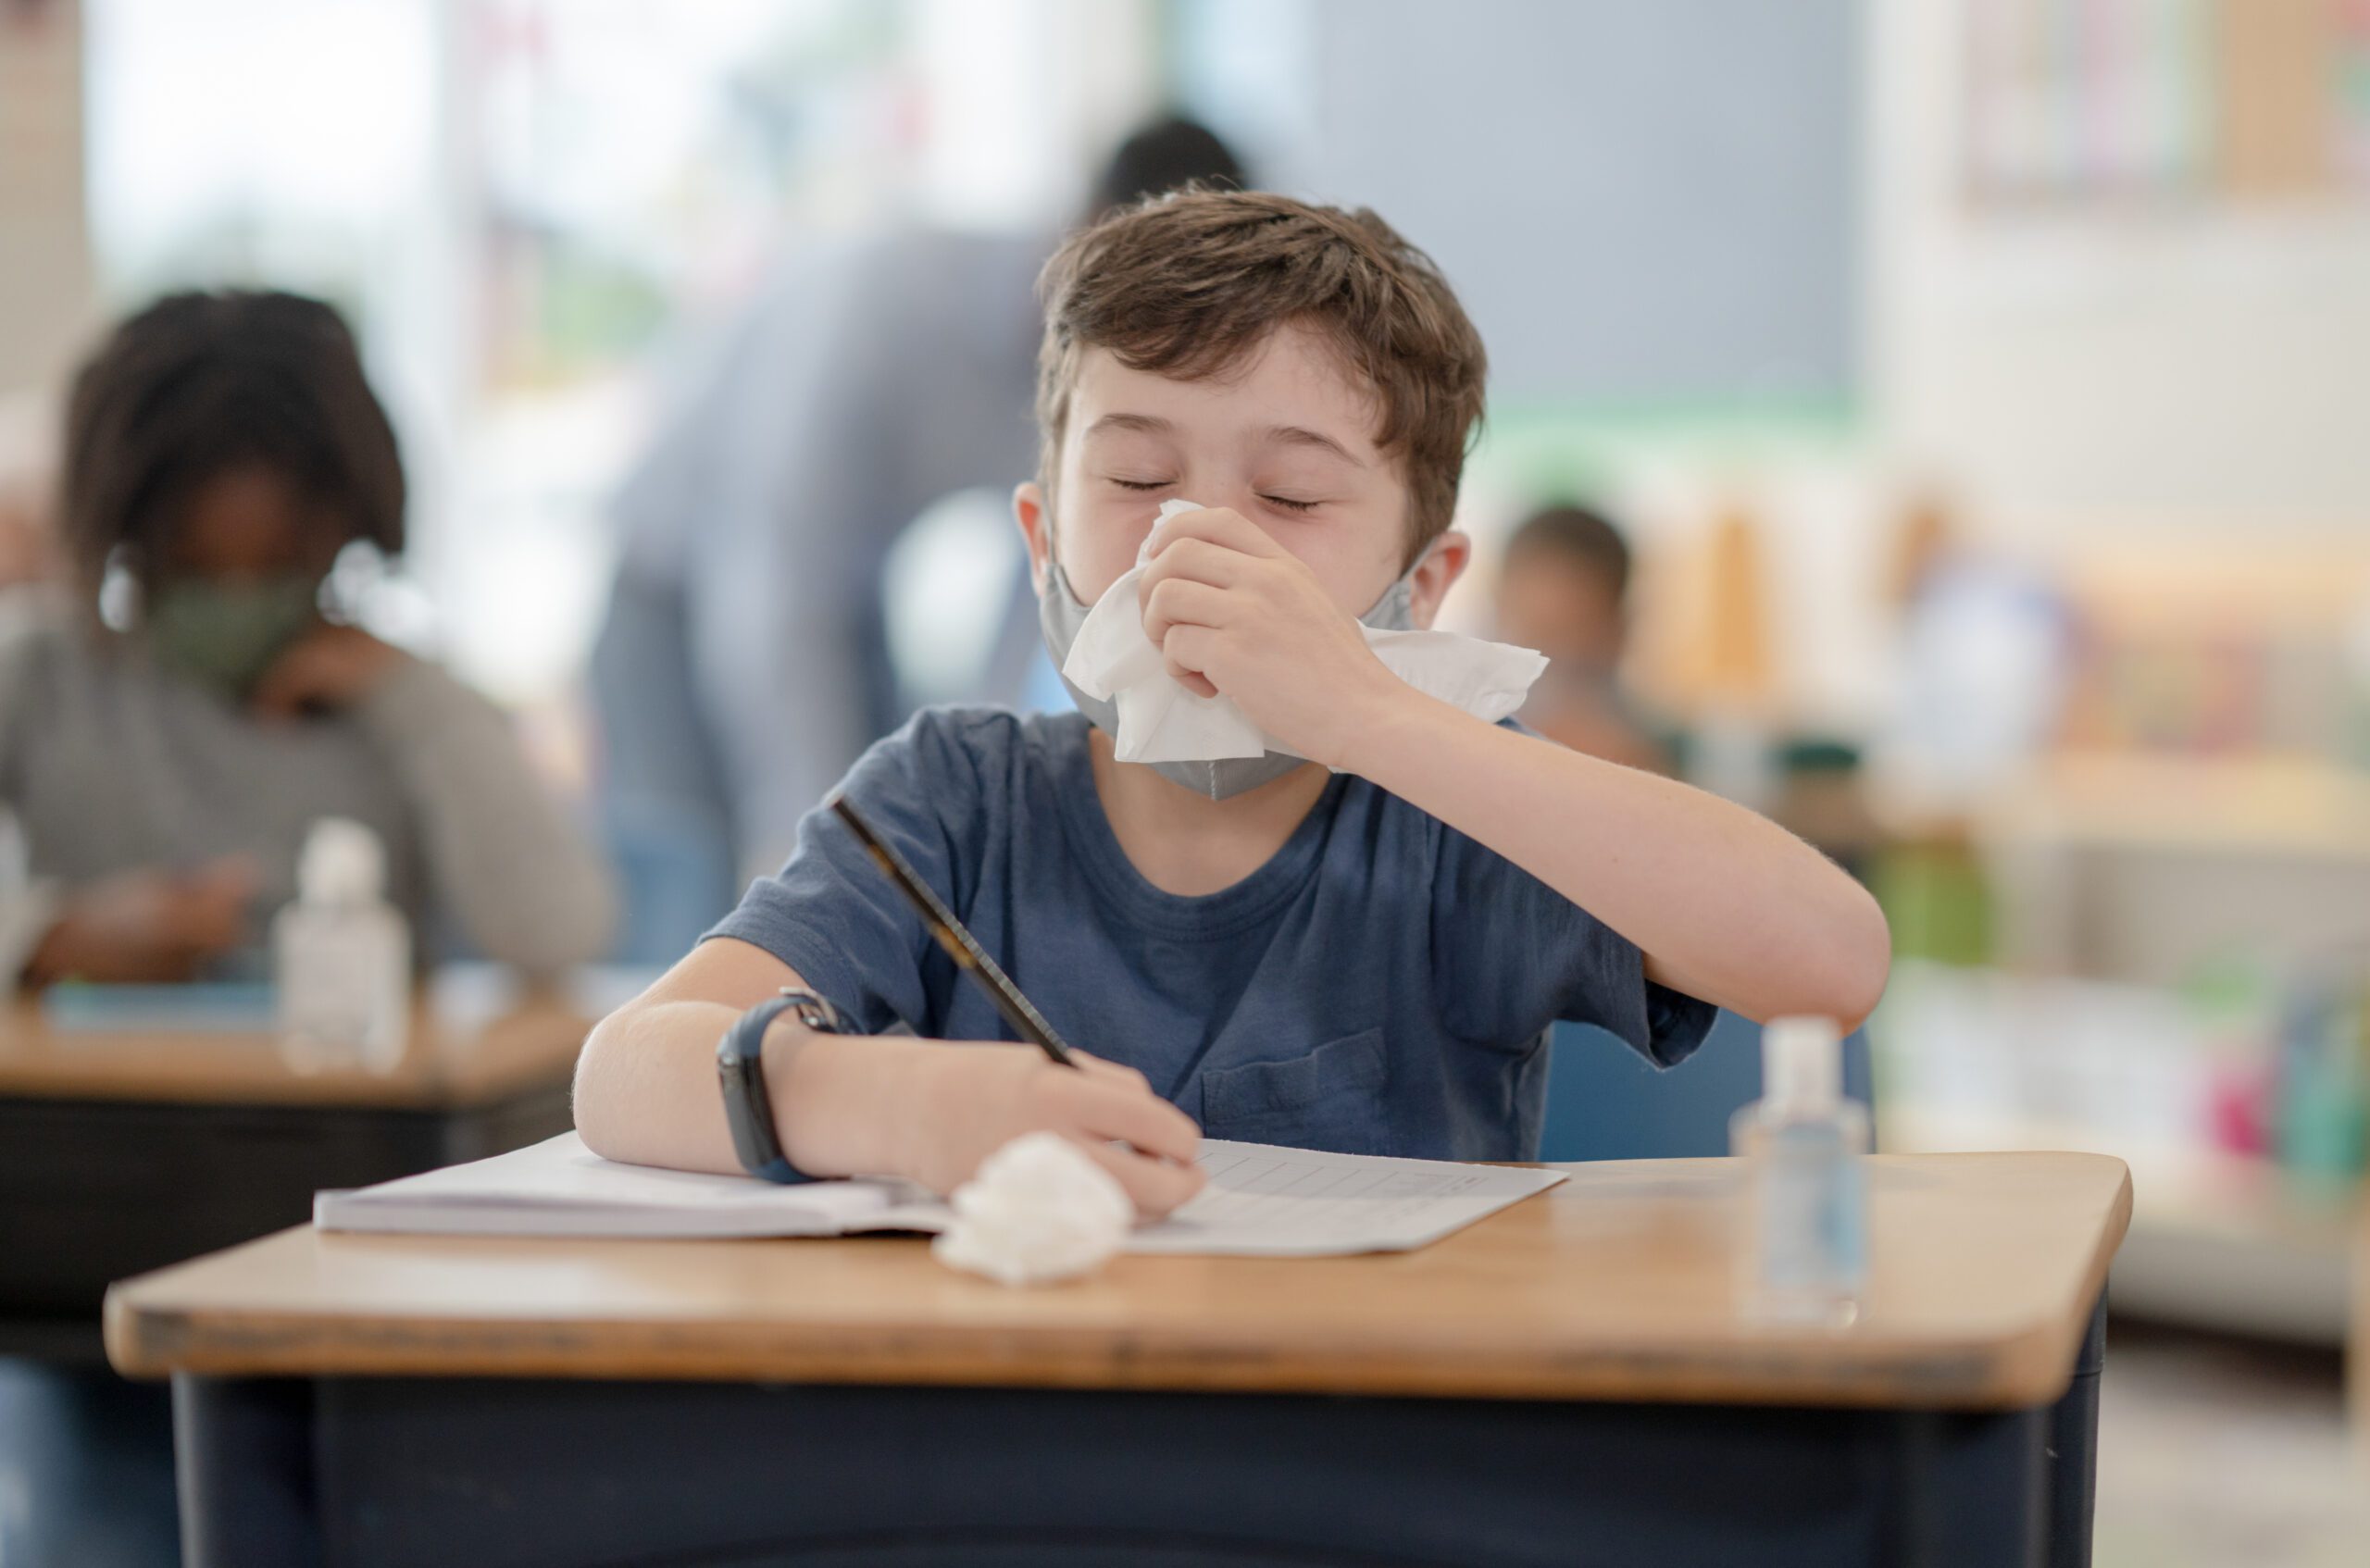 Children coughing and blowing their nose in the classroom.